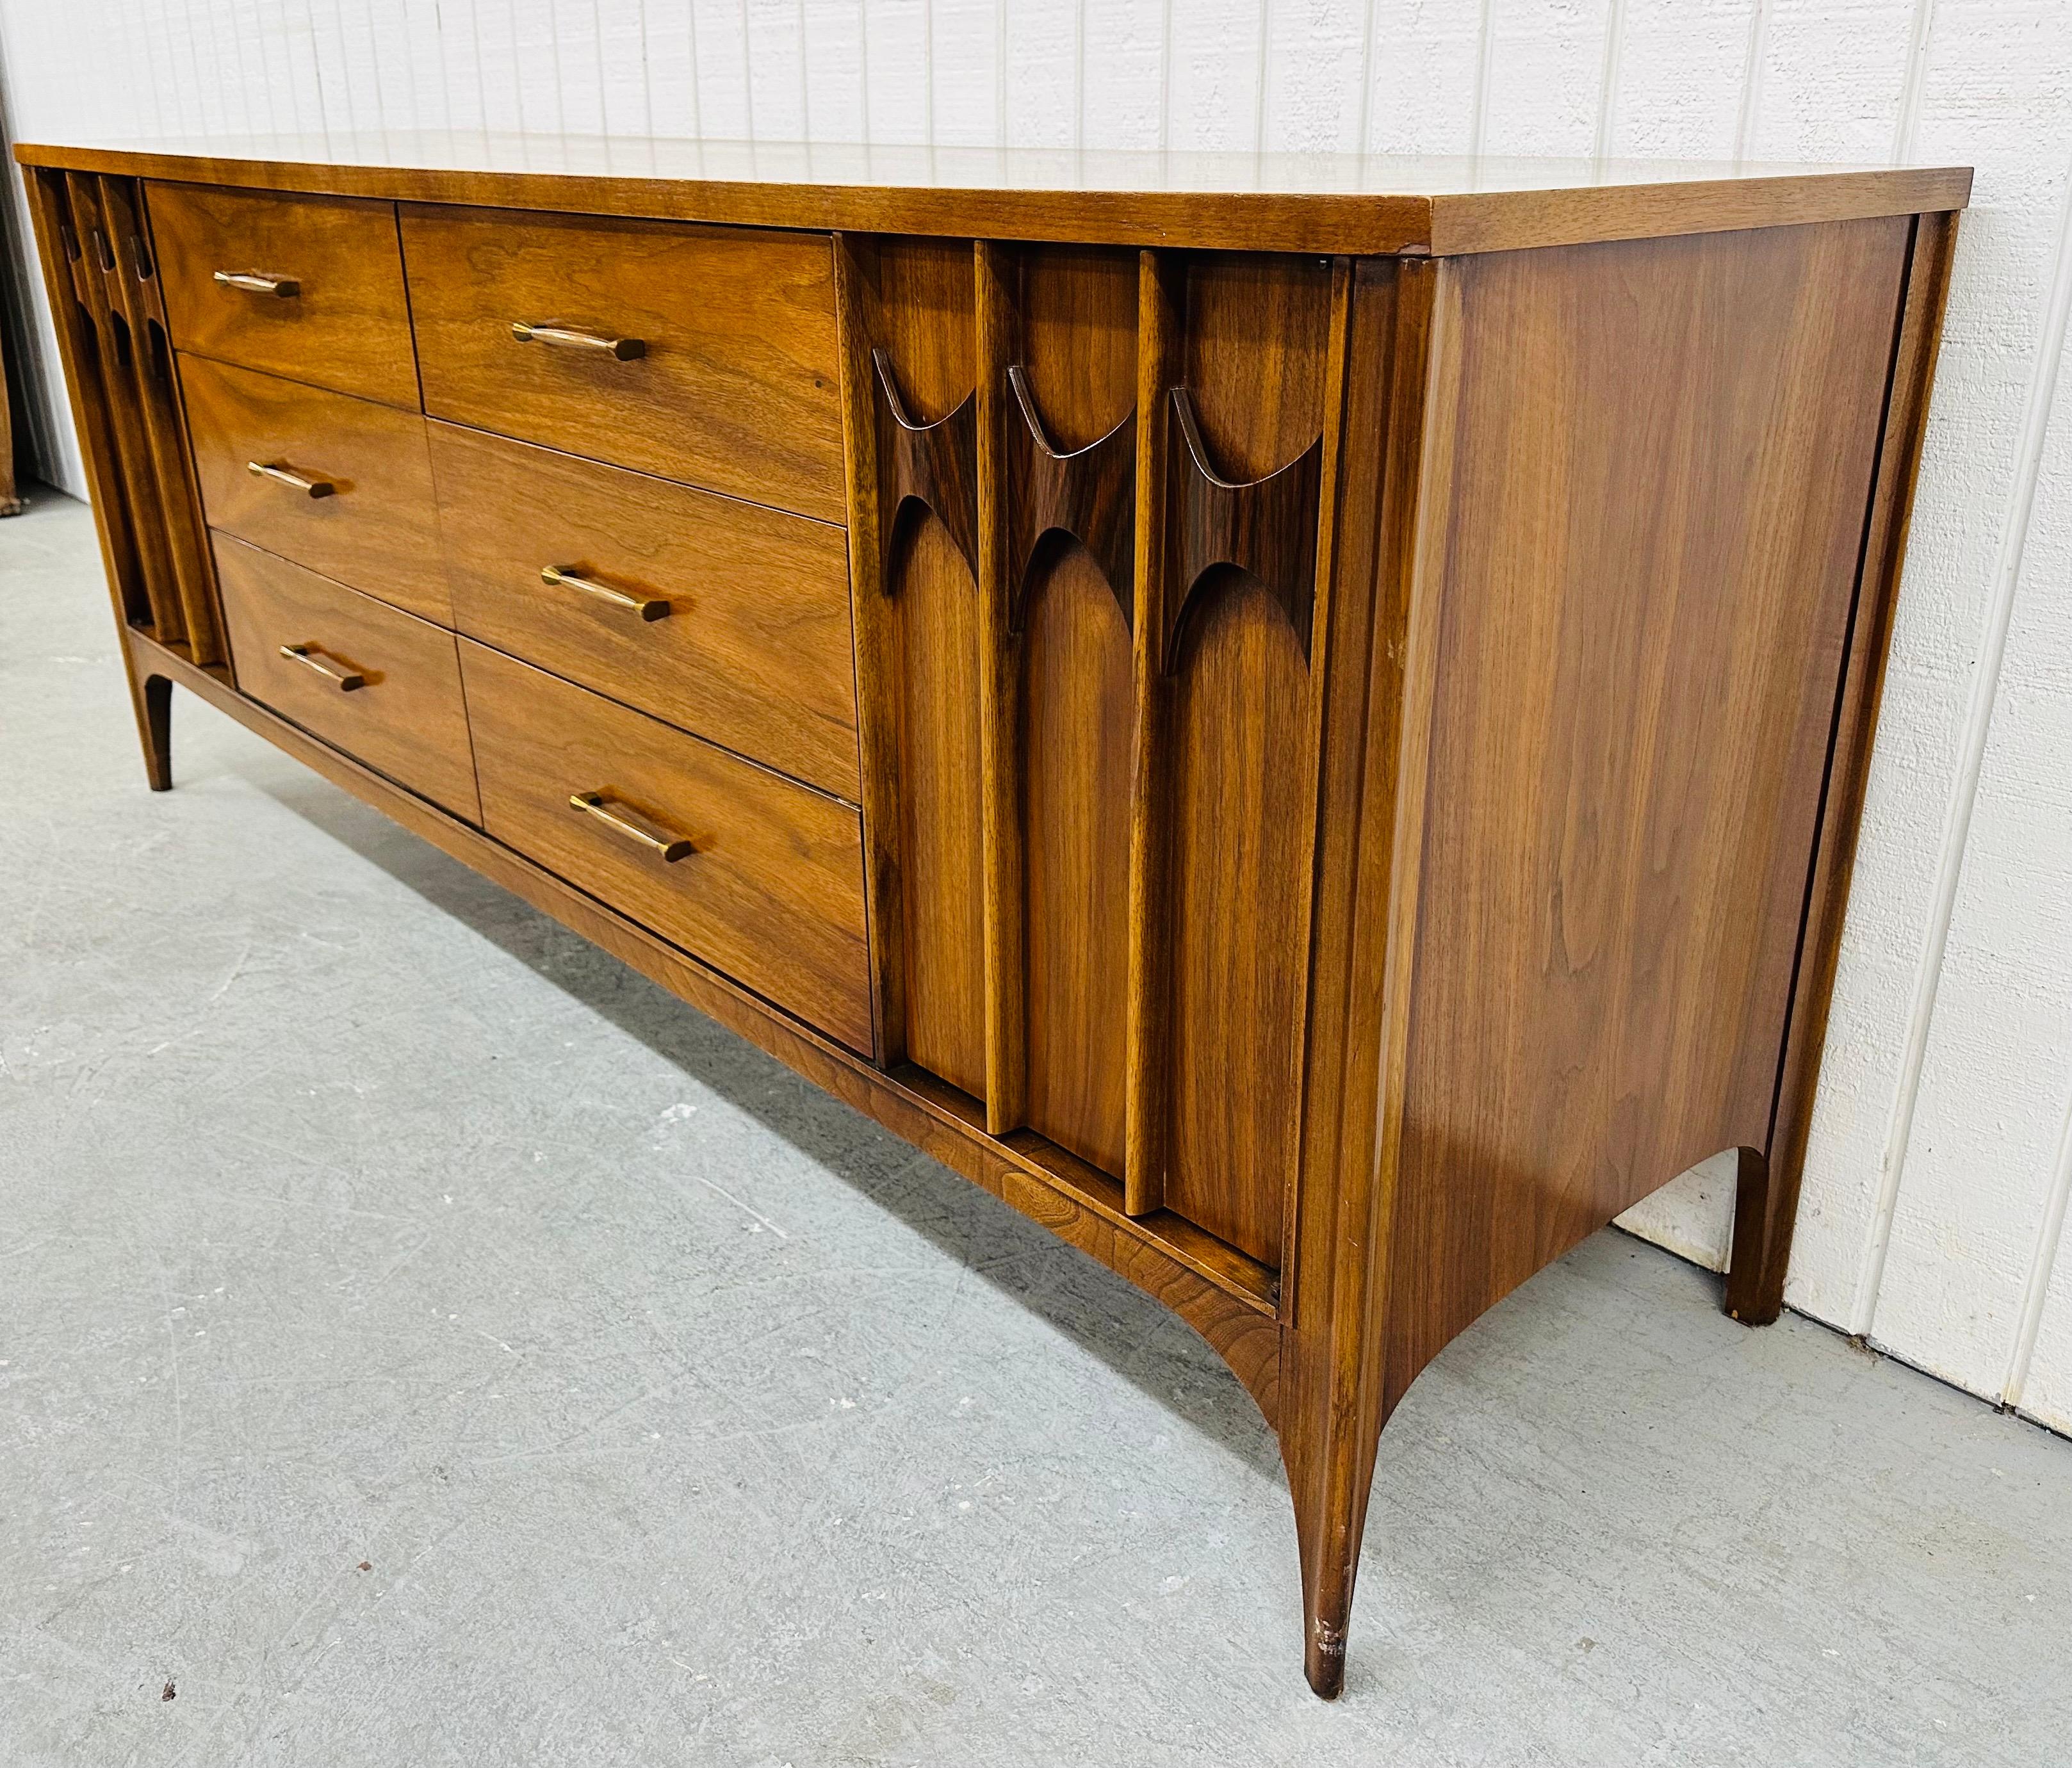 This listing is for a Mid-Century Modern Kent Coffey Perspecta Walnut Dresser. Featuring a straight line design, doors on each side with sculpted rosewood pulls that open up to three hidden drawers, six larger drawers in the center with original